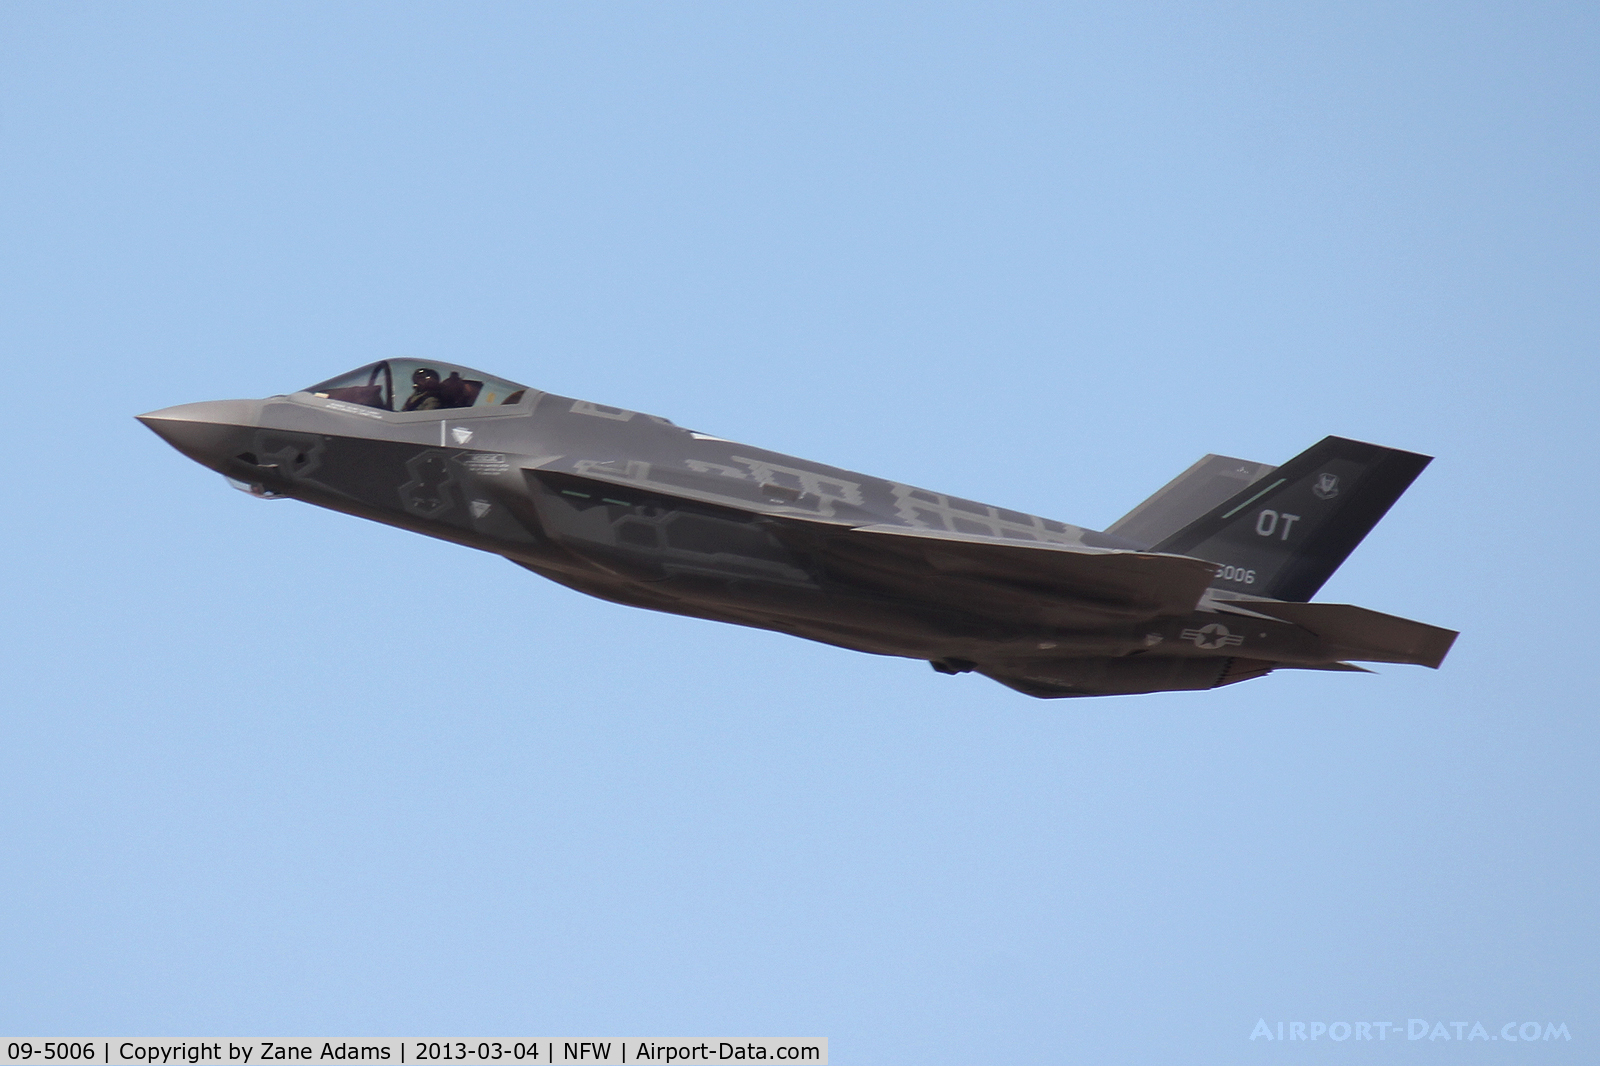 09-5006, 2012 Lockheed Martin F-35A Lightning II C/N AF-19, F-35A departing NAS Fort Worth on it's delivery flight to Edwards AFB